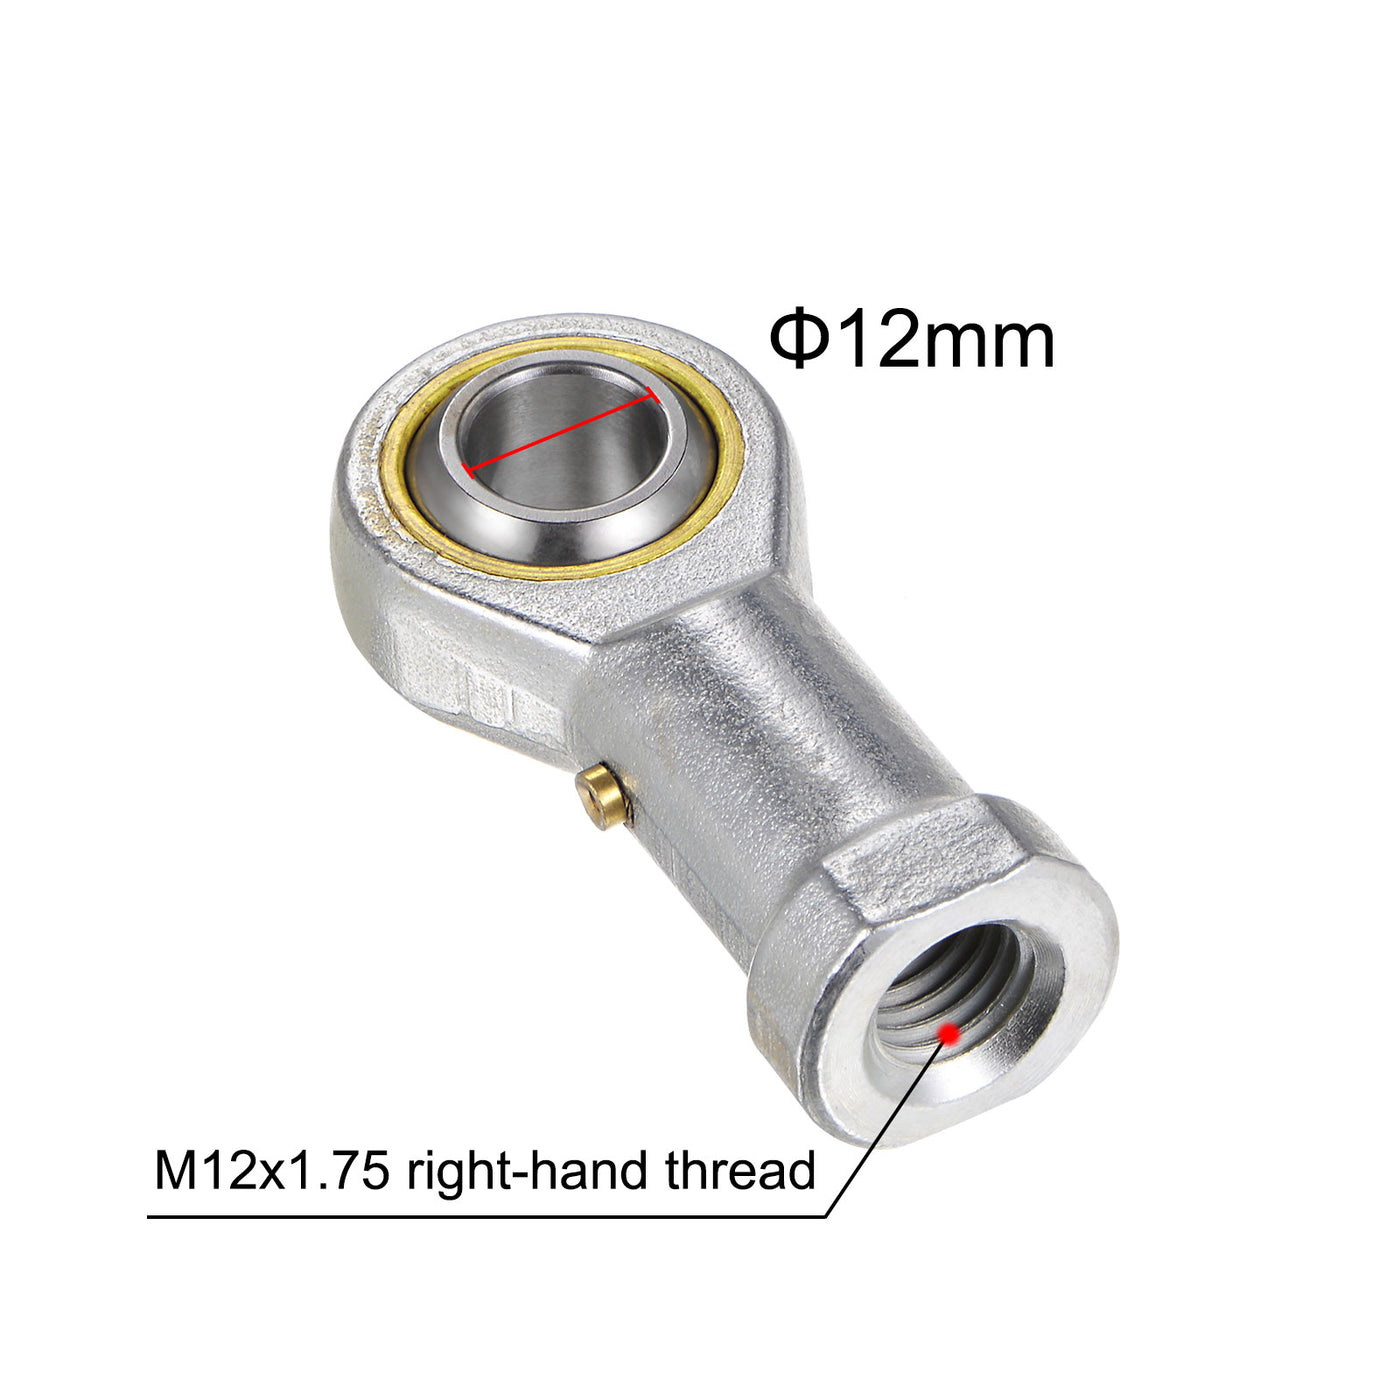 uxcell Uxcell 2pcs PHS12 M12 Female Rod End M12x1.75 Right Hand Thread,Includes Jam Nut